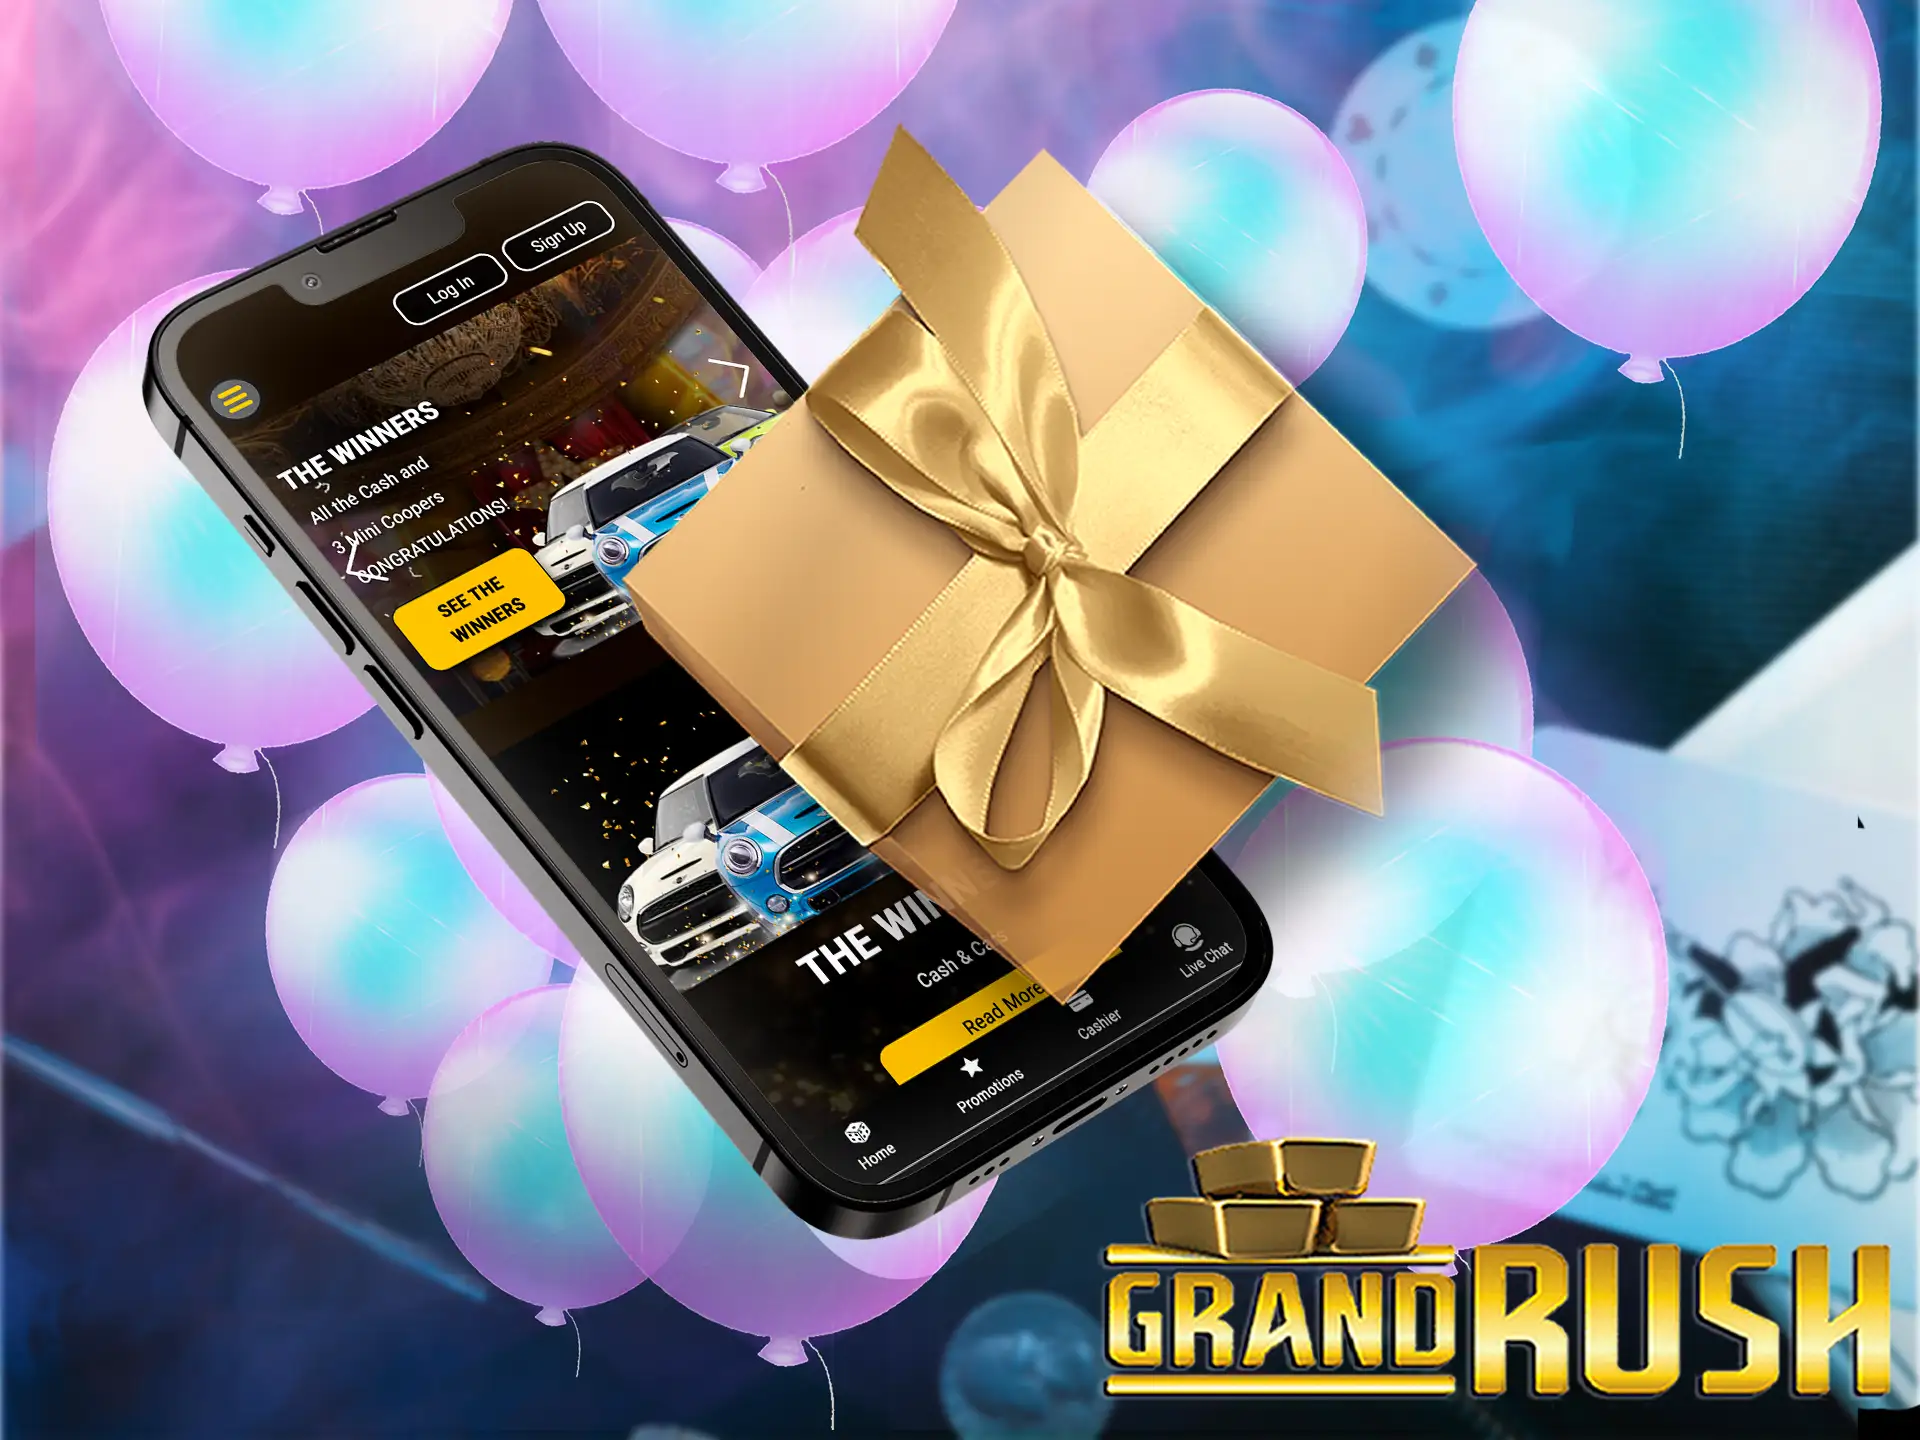 Get a 200% welcome bonus after Grand Rush sign-up.